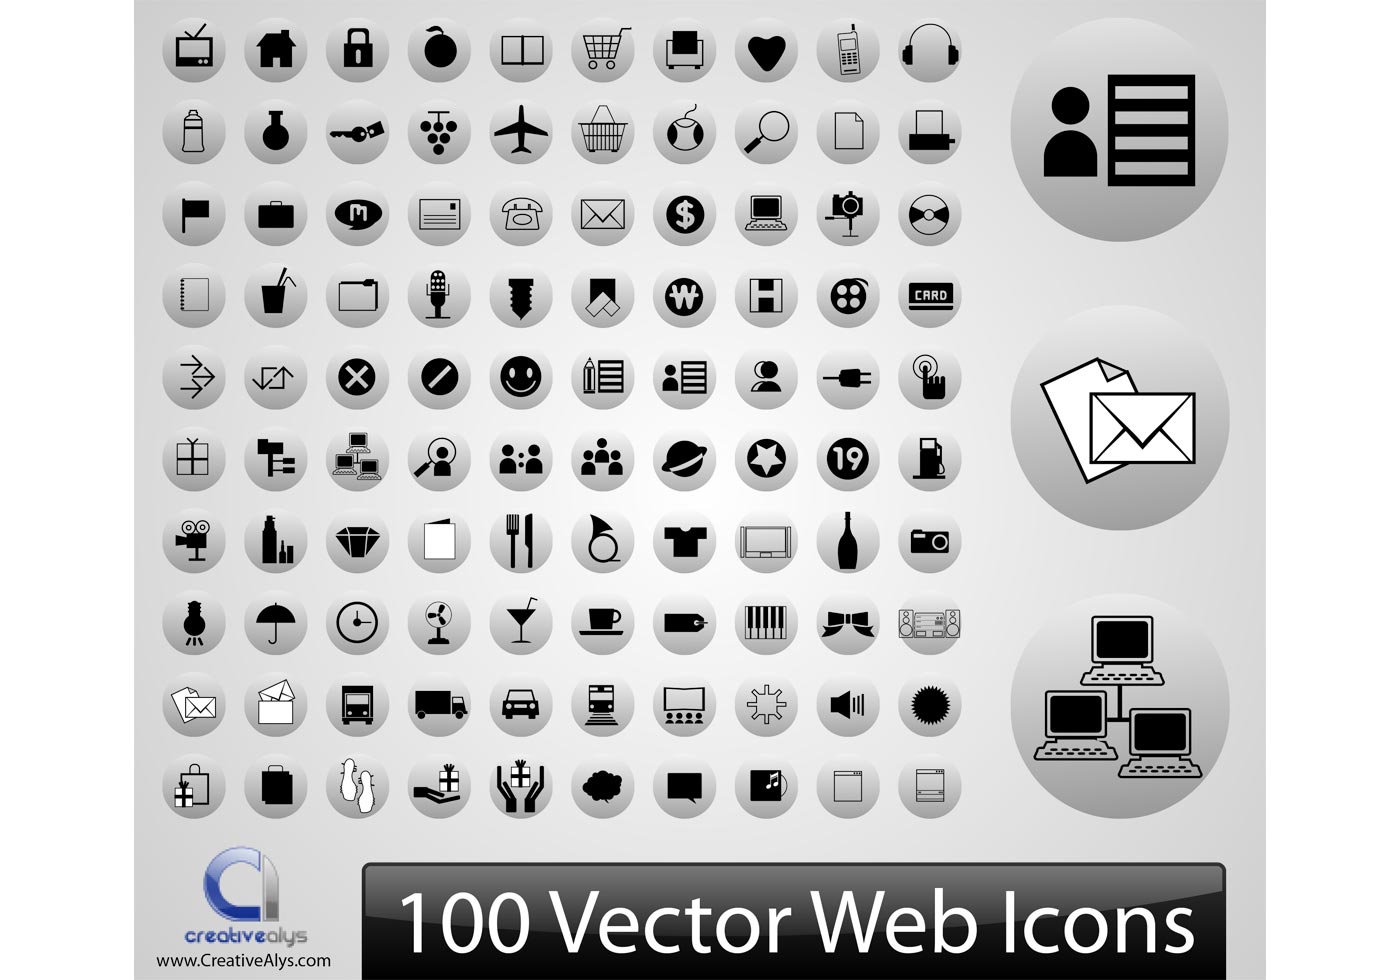 100 Vector Web Icons - Download Free Vector Art, Stock Graphics & Images